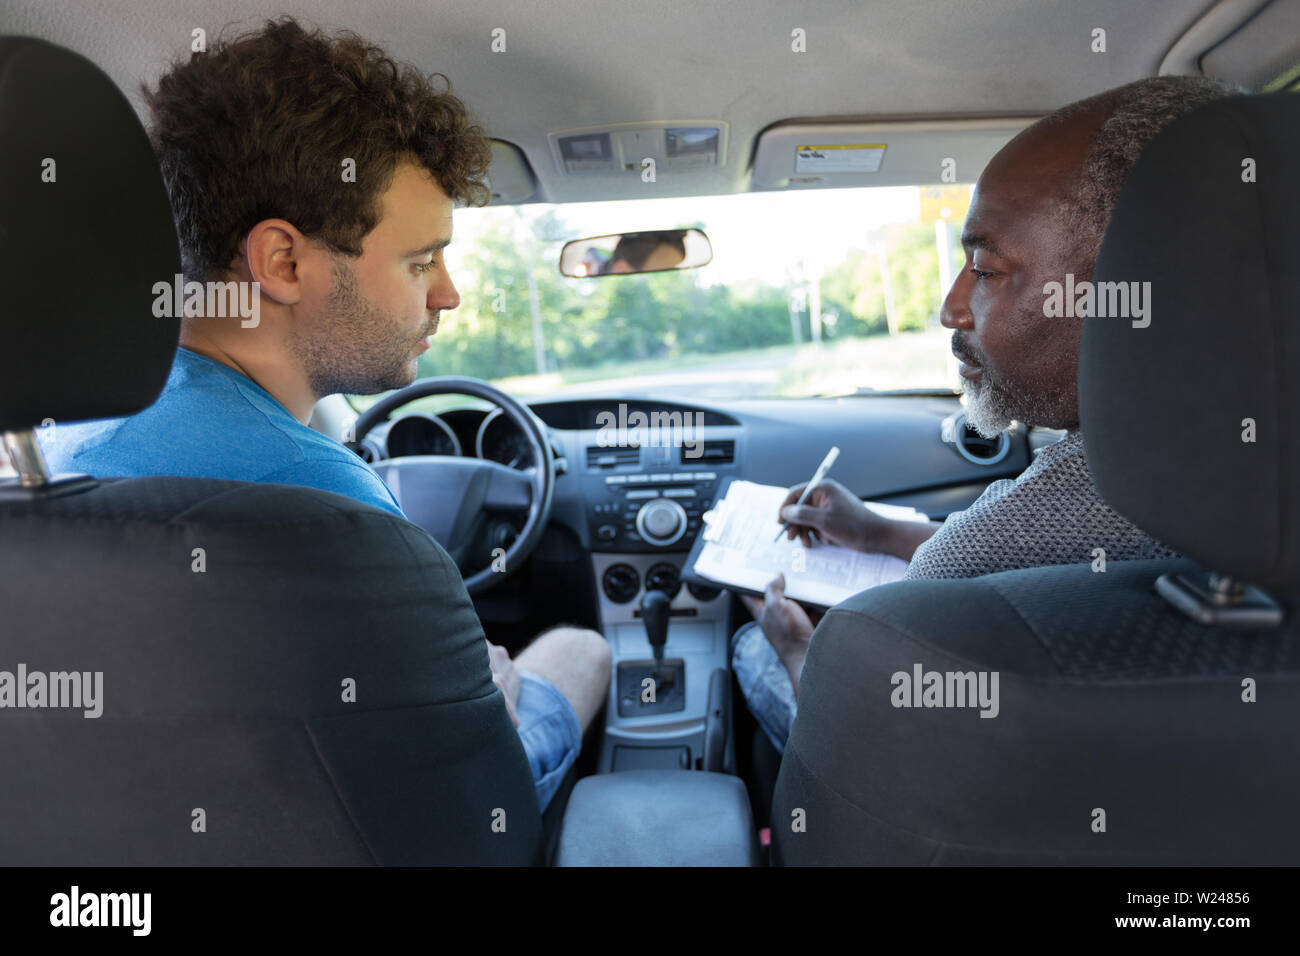 Driving Instructor And Student In The Front Of The Car Stock Photo